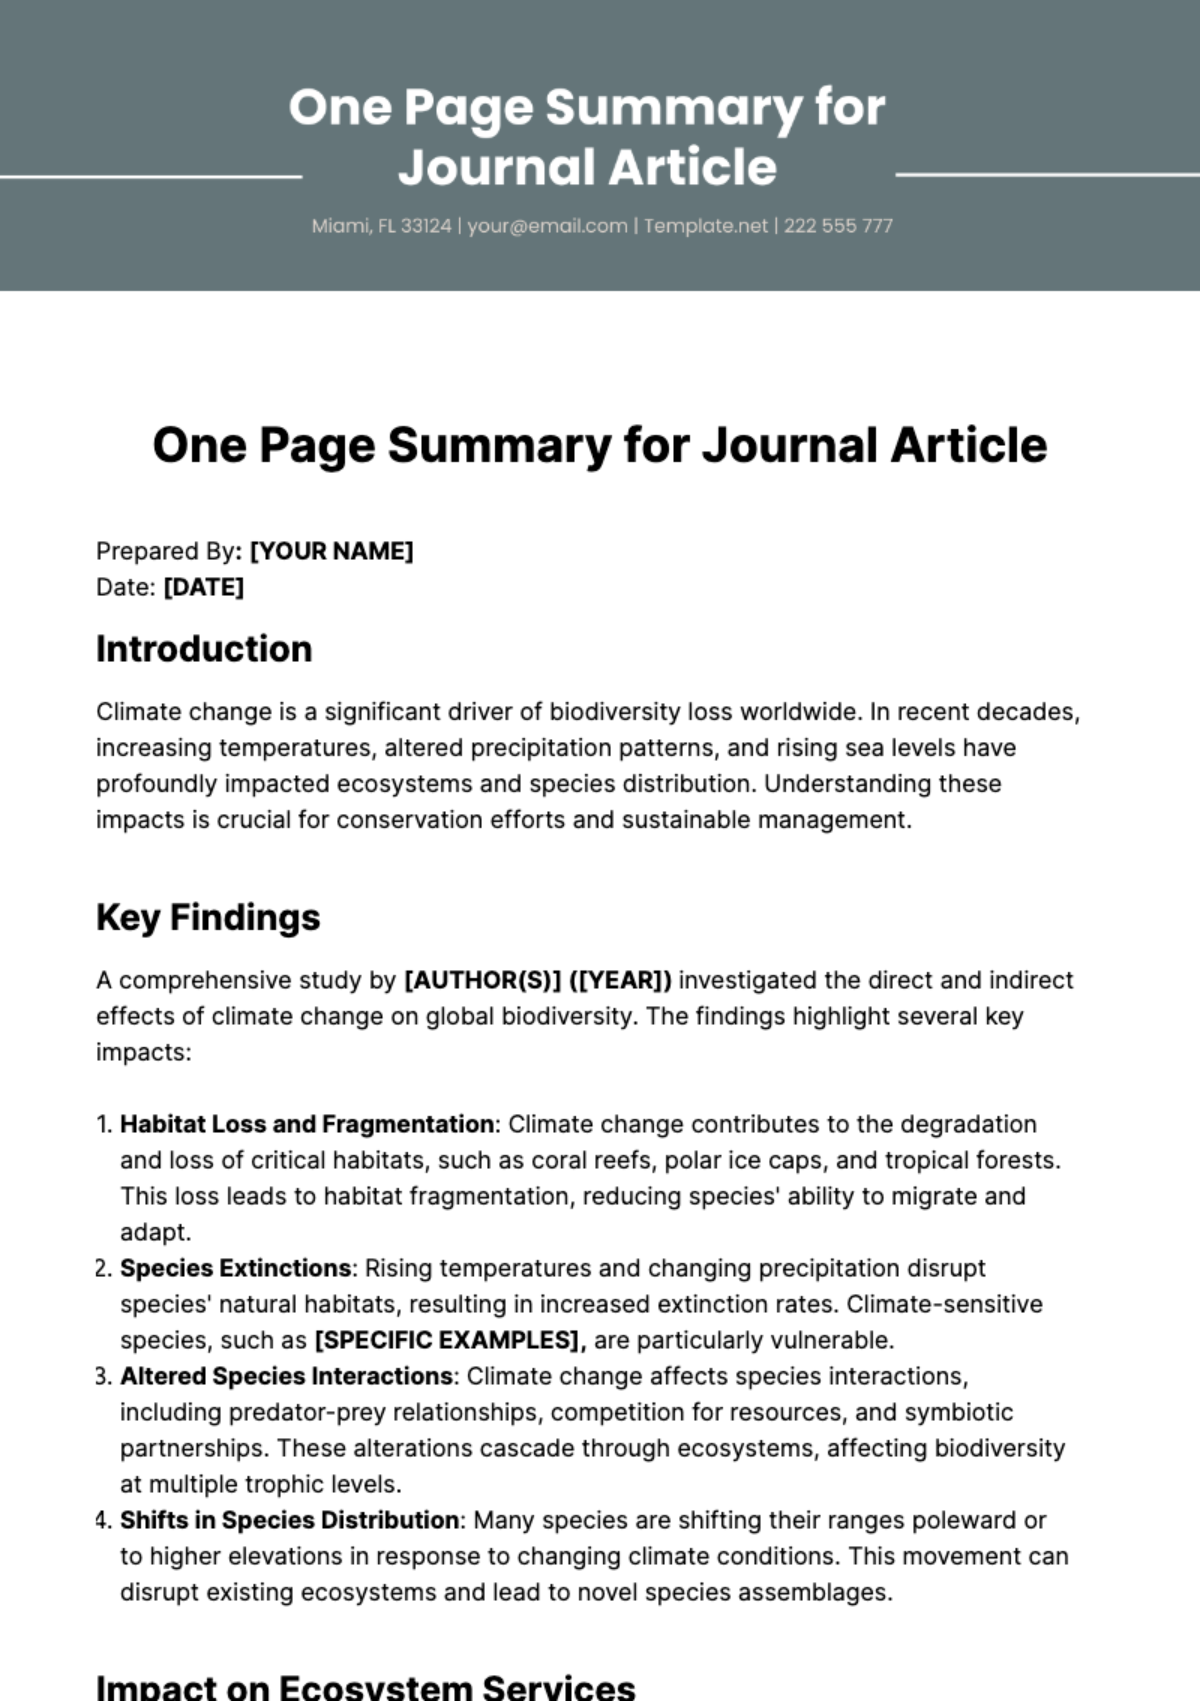 One Page Summary for Journal Article Template